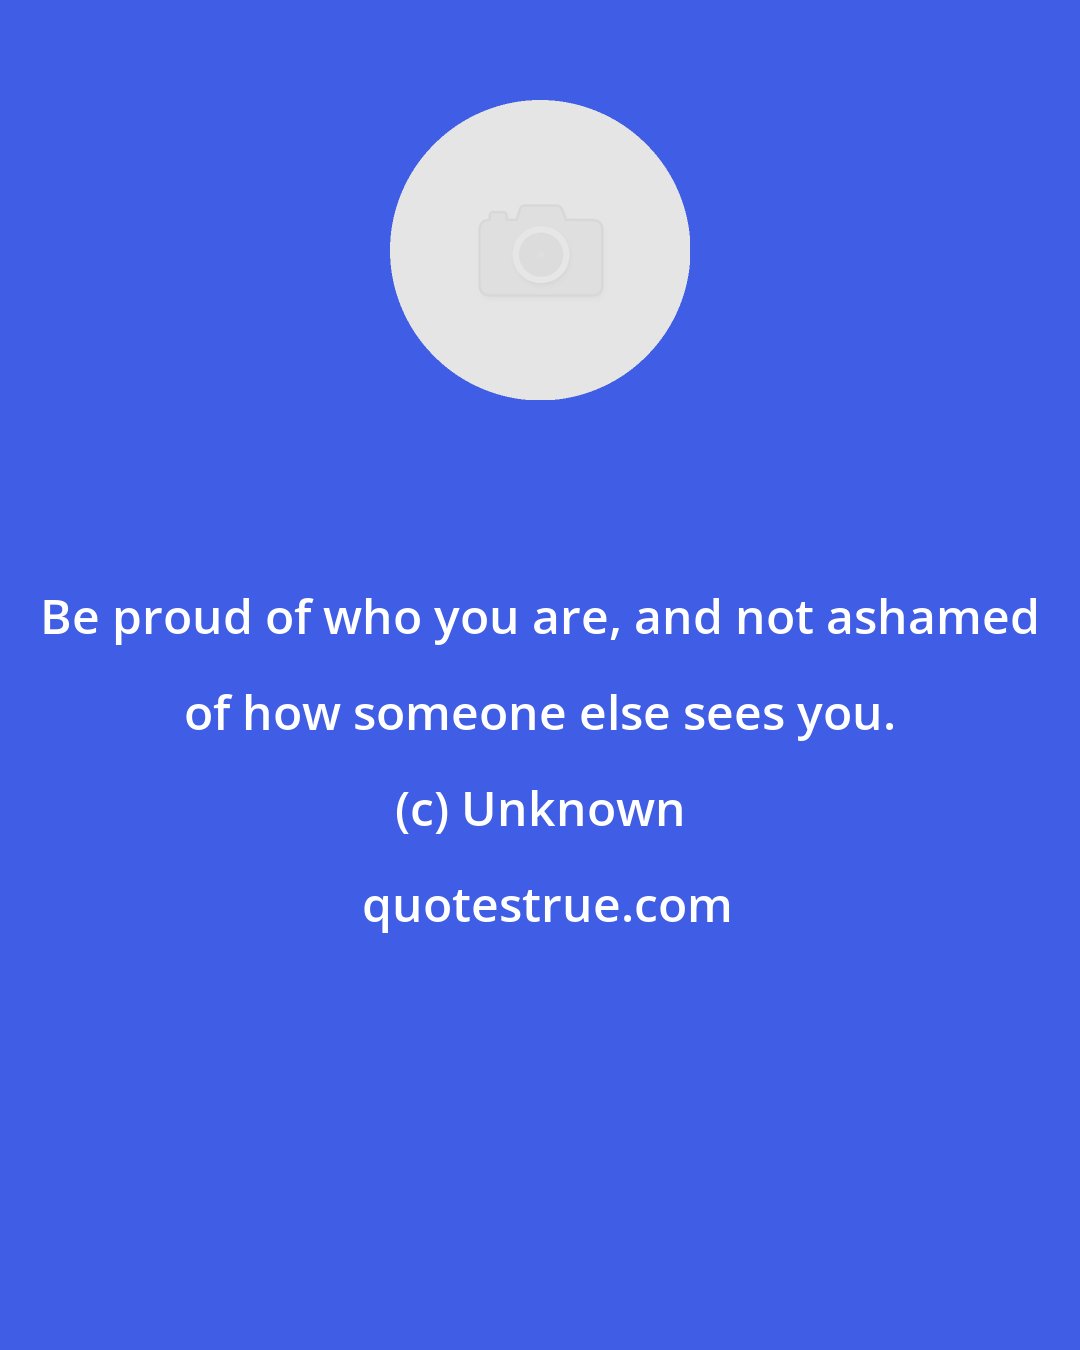 Unknown: Be proud of who you are, and not ashamed of how someone else sees you.